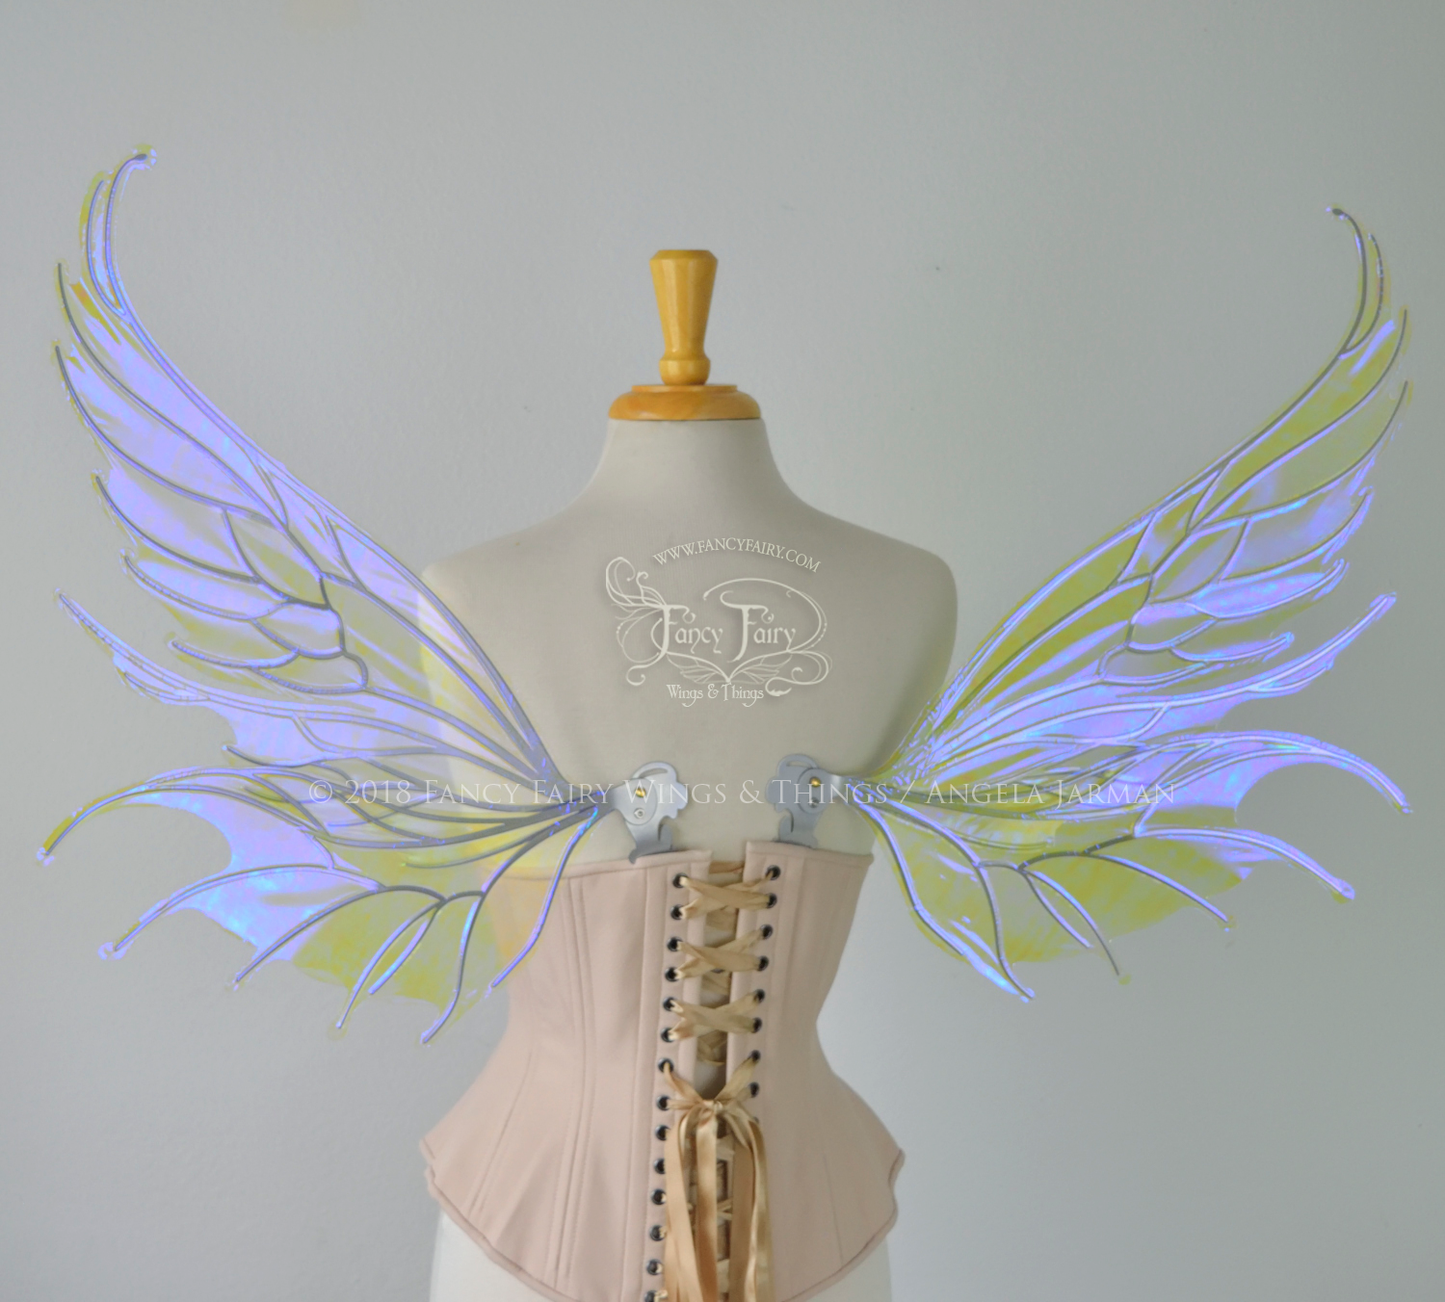 Aquatica Iridescent Convertible Fairy Wings in Clear Ultraviolet with Silver veins